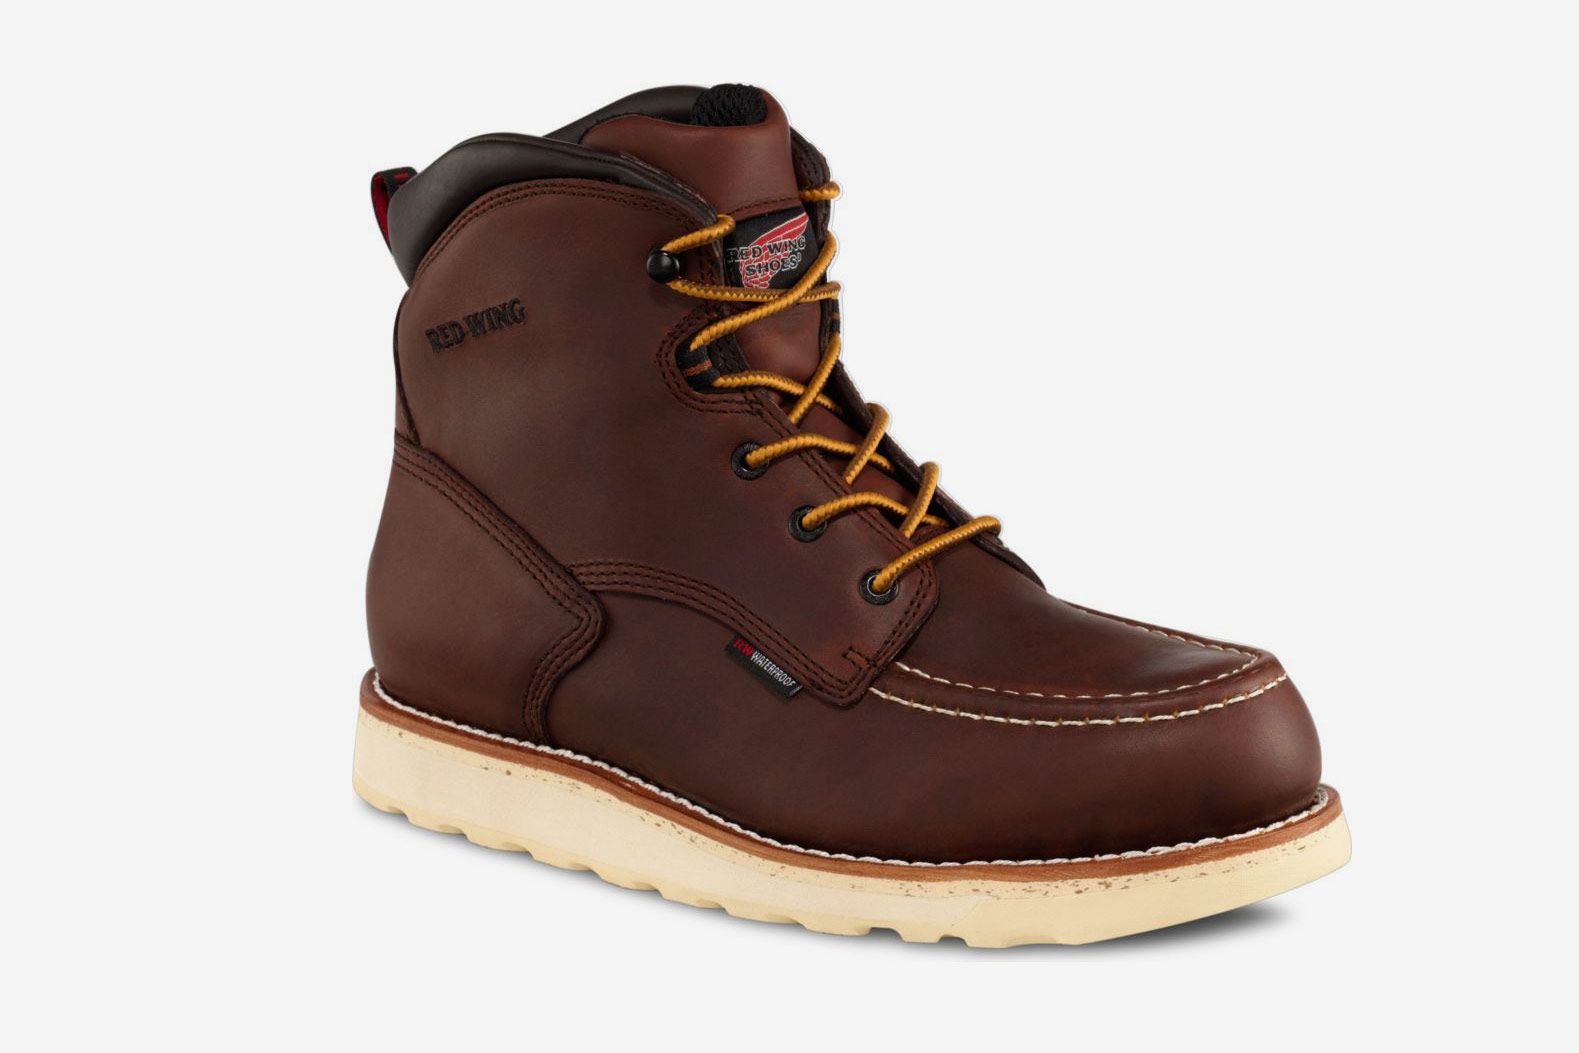 Red Wing Low Cut Work Boots | peacecommission.kdsg.gov.ng